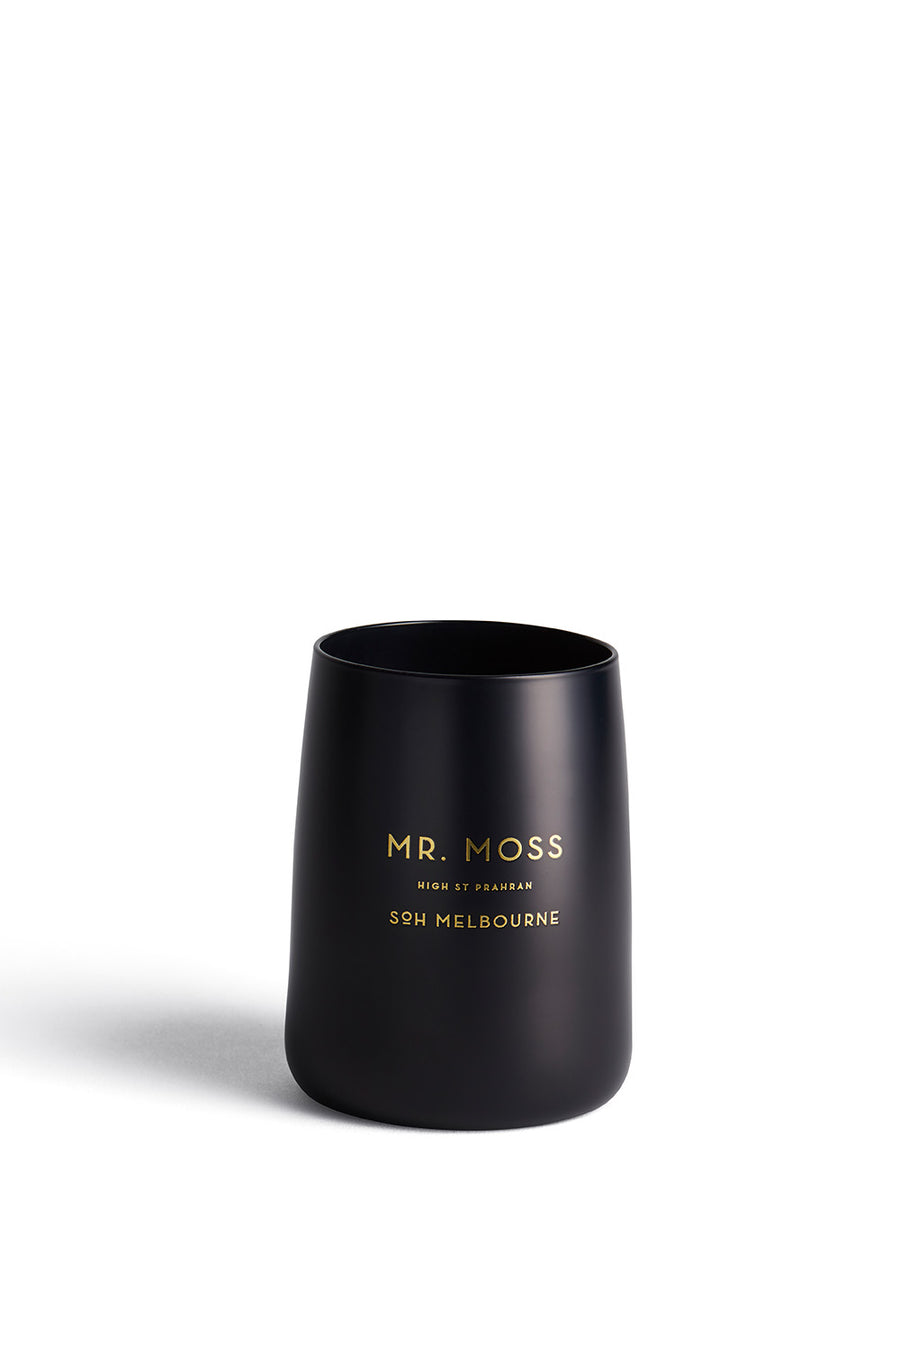 MR. MOSS CANDLE - CrateExpectations